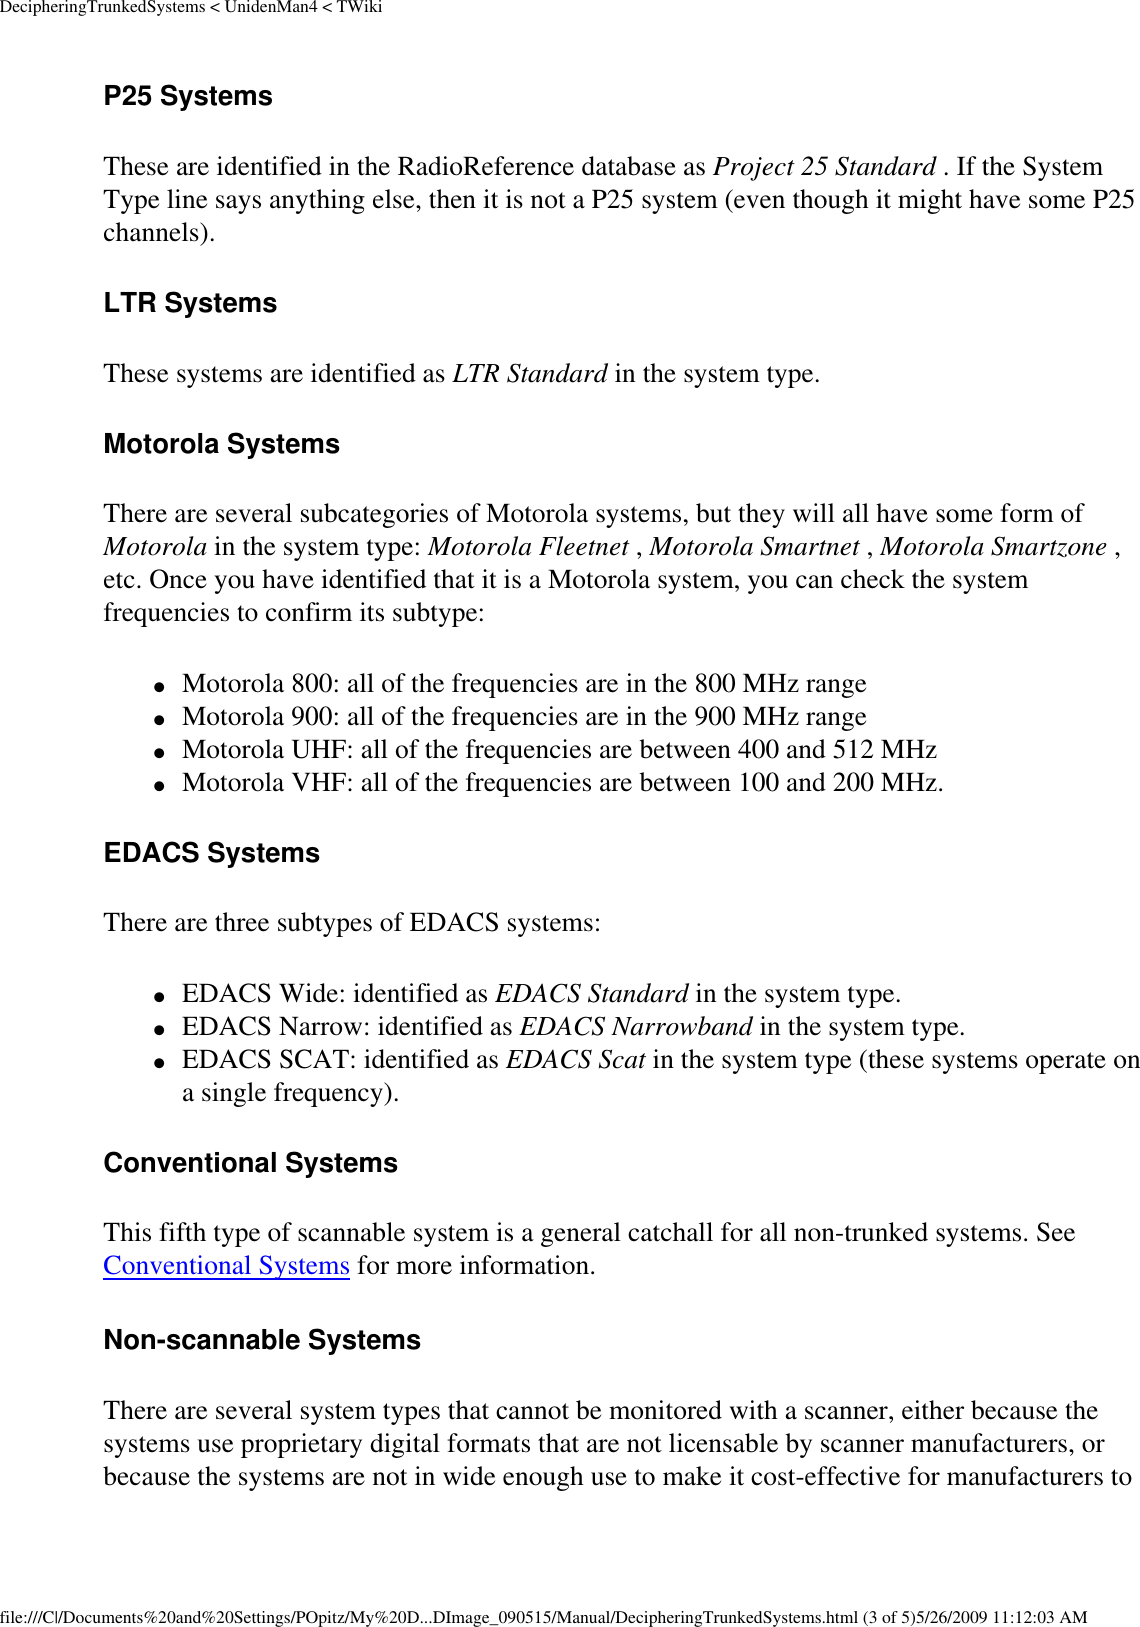 DecipheringTrunkedSystems &lt; UnidenMan4 &lt; TWikiP25 Systems These are identified in the RadioReference database as Project 25 Standard . If the System Type line says anything else, then it is not a P25 system (even though it might have some P25 channels). LTR Systems These systems are identified as LTR Standard in the system type. Motorola Systems There are several subcategories of Motorola systems, but they will all have some form of Motorola in the system type: Motorola Fleetnet , Motorola Smartnet , Motorola Smartzone , etc. Once you have identified that it is a Motorola system, you can check the system frequencies to confirm its subtype: ●     Motorola 800: all of the frequencies are in the 800 MHz range ●     Motorola 900: all of the frequencies are in the 900 MHz range ●     Motorola UHF: all of the frequencies are between 400 and 512 MHz ●     Motorola VHF: all of the frequencies are between 100 and 200 MHz. EDACS Systems There are three subtypes of EDACS systems: ●     EDACS Wide: identified as EDACS Standard in the system type. ●     EDACS Narrow: identified as EDACS Narrowband in the system type. ●     EDACS SCAT: identified as EDACS Scat in the system type (these systems operate on a single frequency). Conventional Systems This fifth type of scannable system is a general catchall for all non-trunked systems. See Conventional Systems for more information. Non-scannable Systems There are several system types that cannot be monitored with a scanner, either because the systems use proprietary digital formats that are not licensable by scanner manufacturers, or because the systems are not in wide enough use to make it cost-effective for manufacturers to file:///C|/Documents%20and%20Settings/POpitz/My%20D...DImage_090515/Manual/DecipheringTrunkedSystems.html (3 of 5)5/26/2009 11:12:03 AM